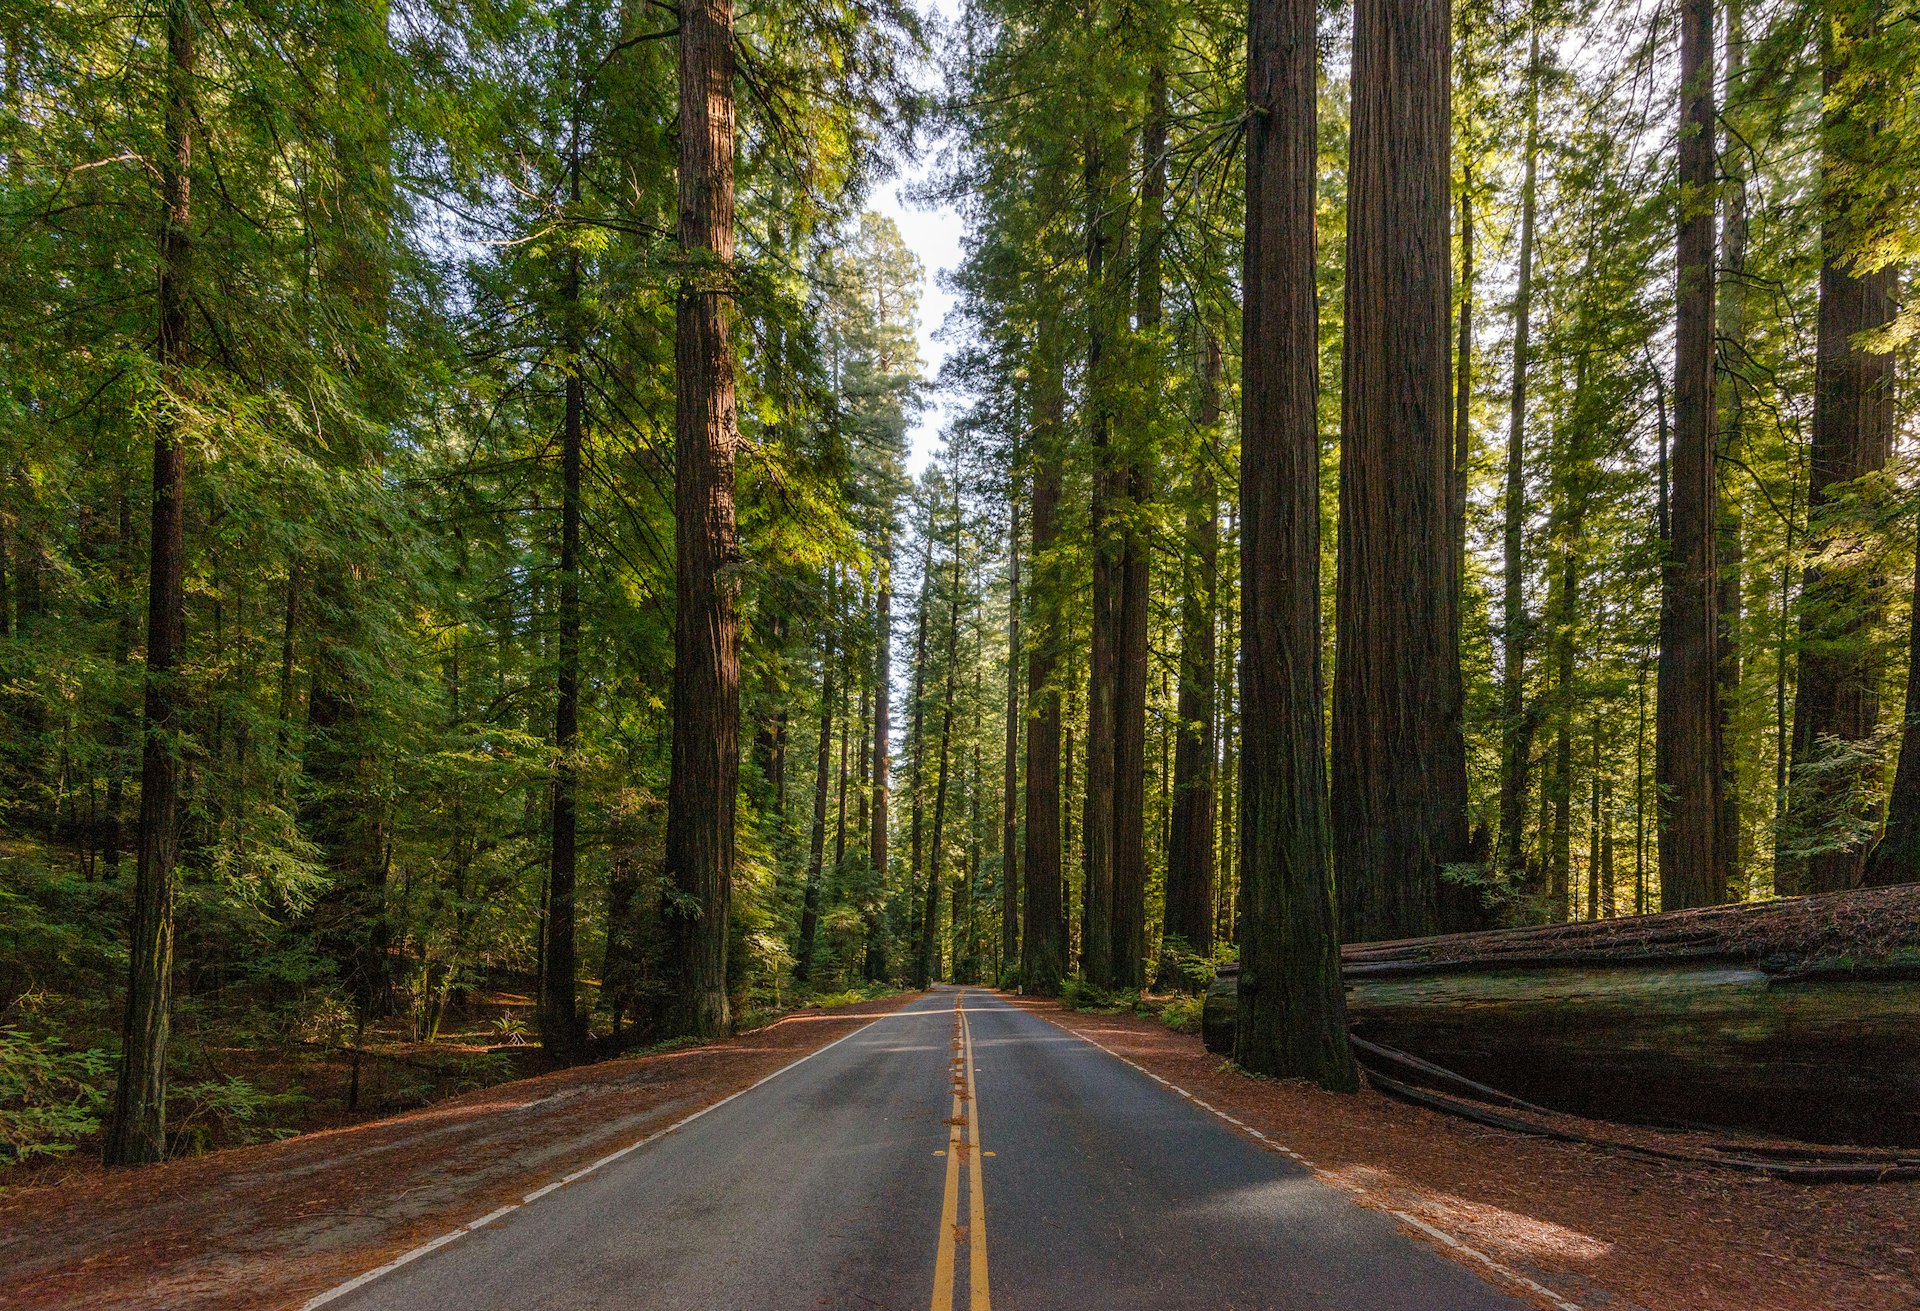 Features - Avenue of the Giants California